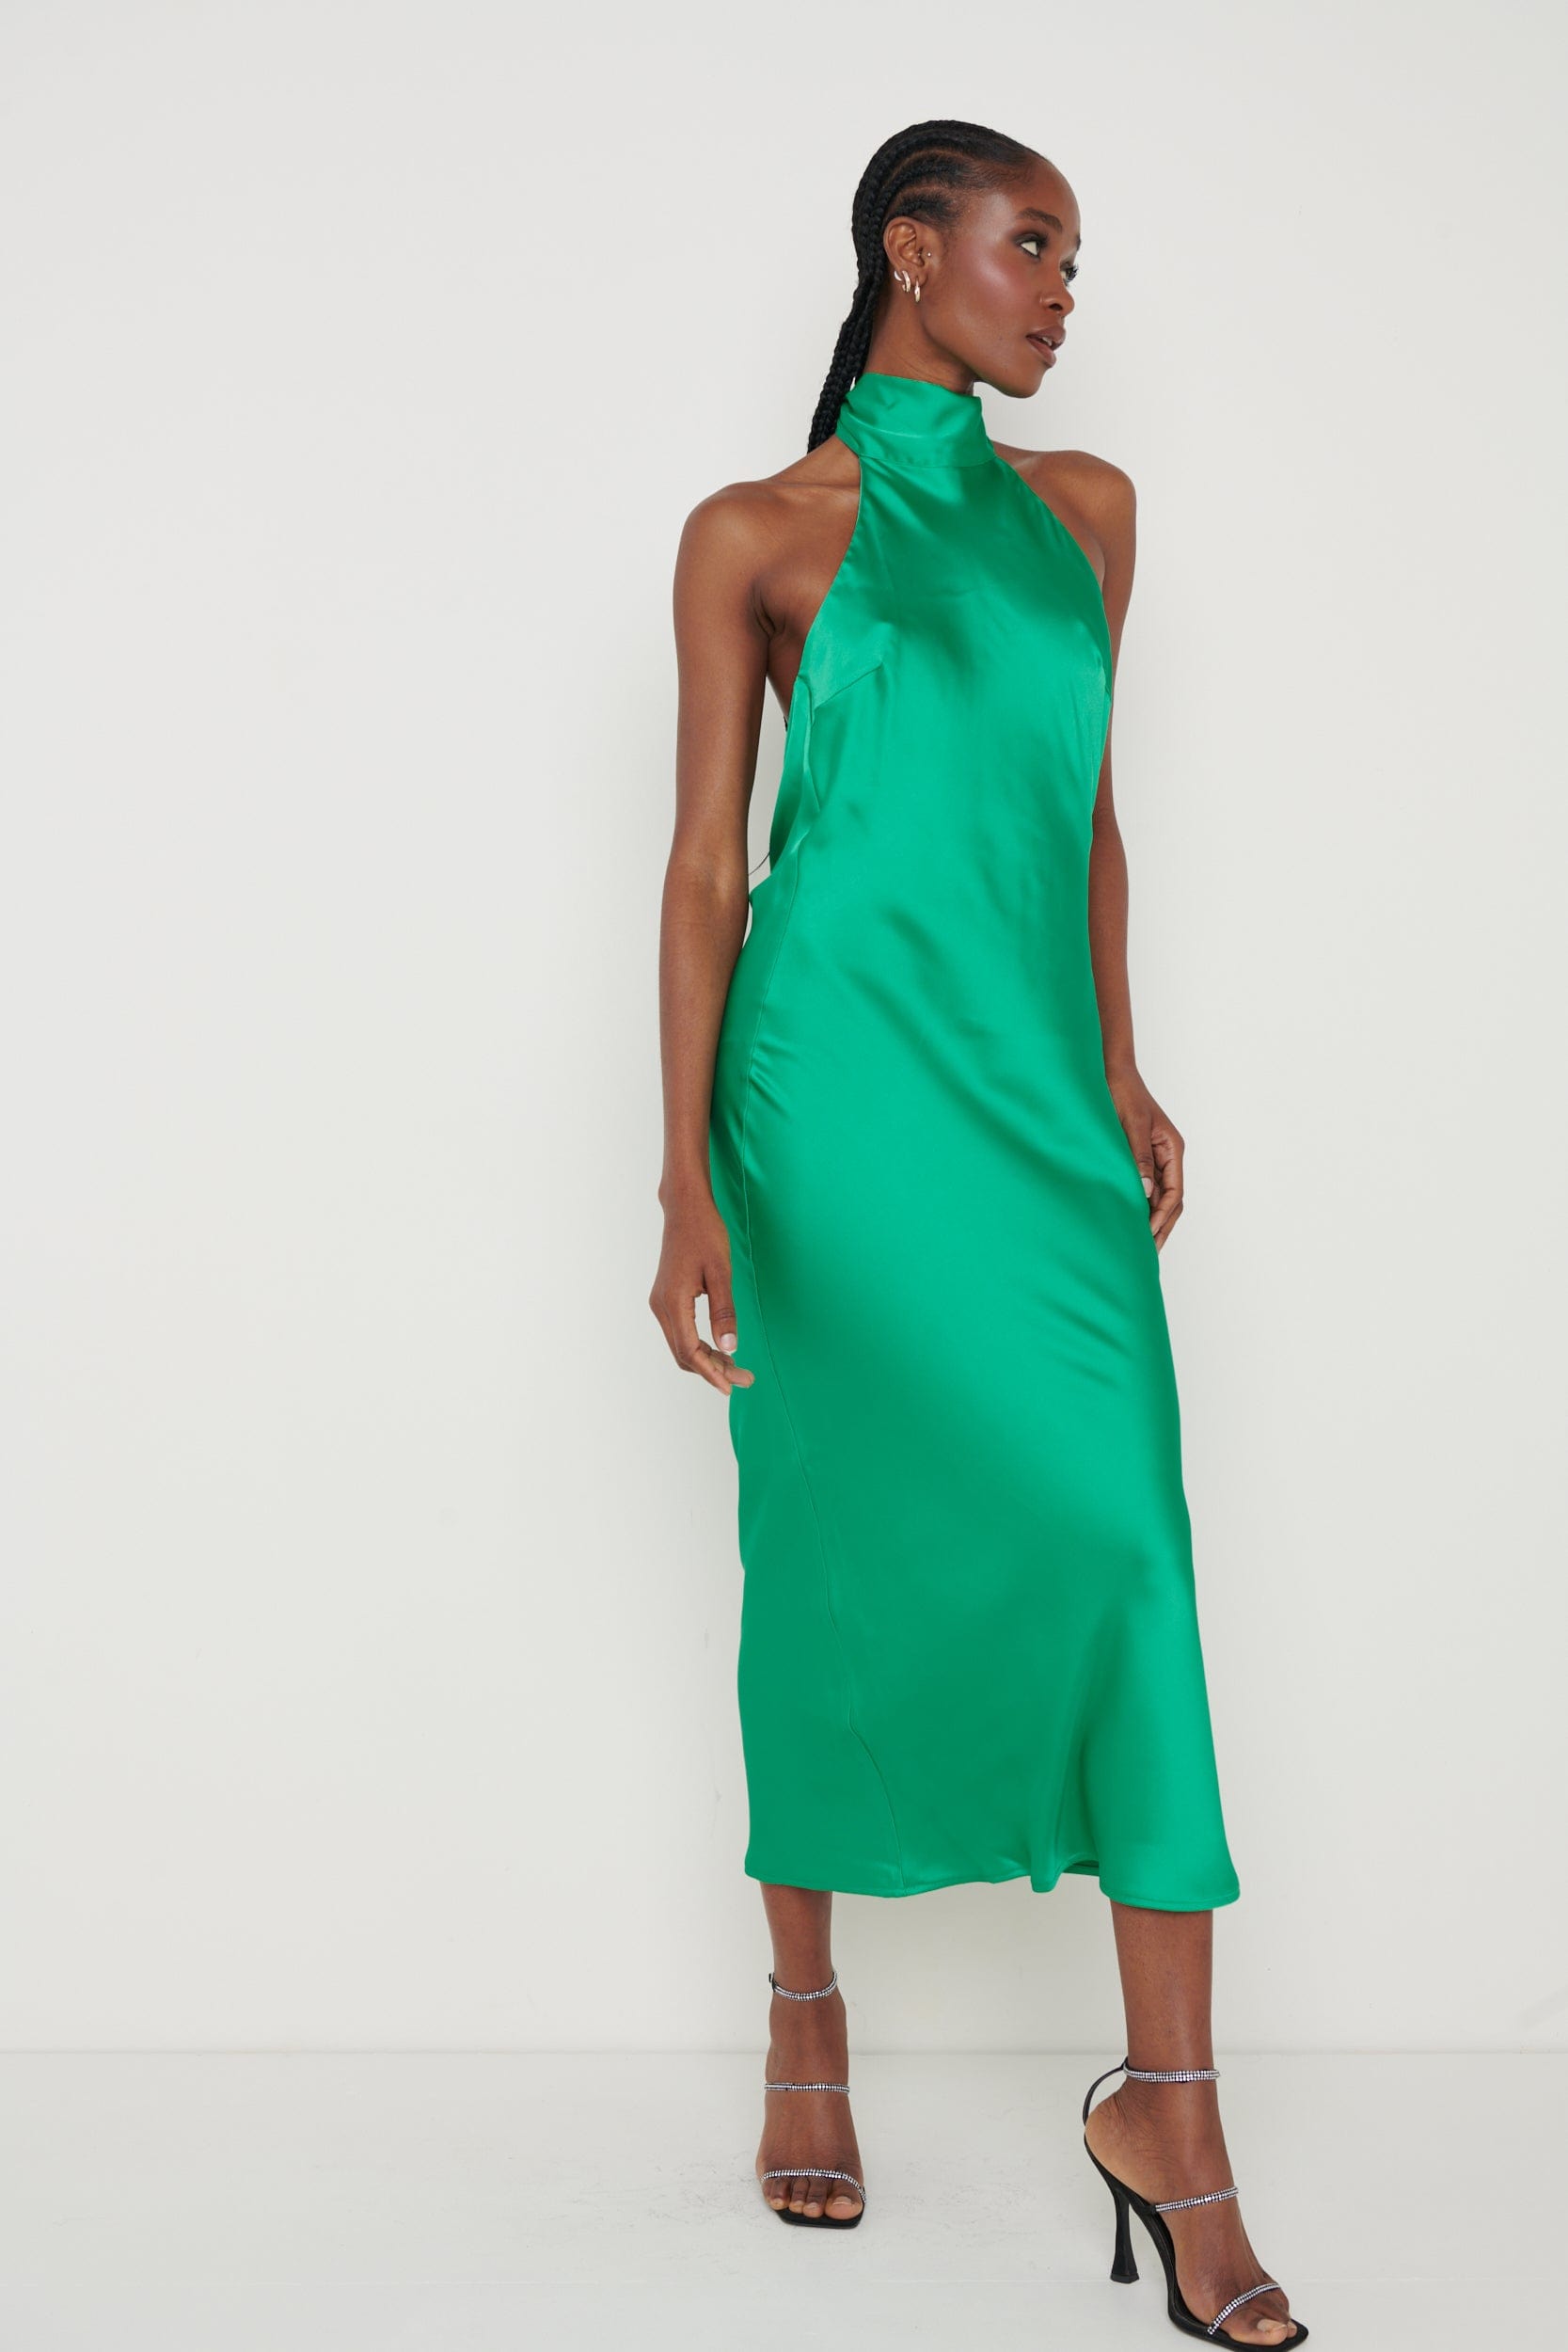 Raleigh Recycled Cowl Back Midaxi Dress - Emerald Green